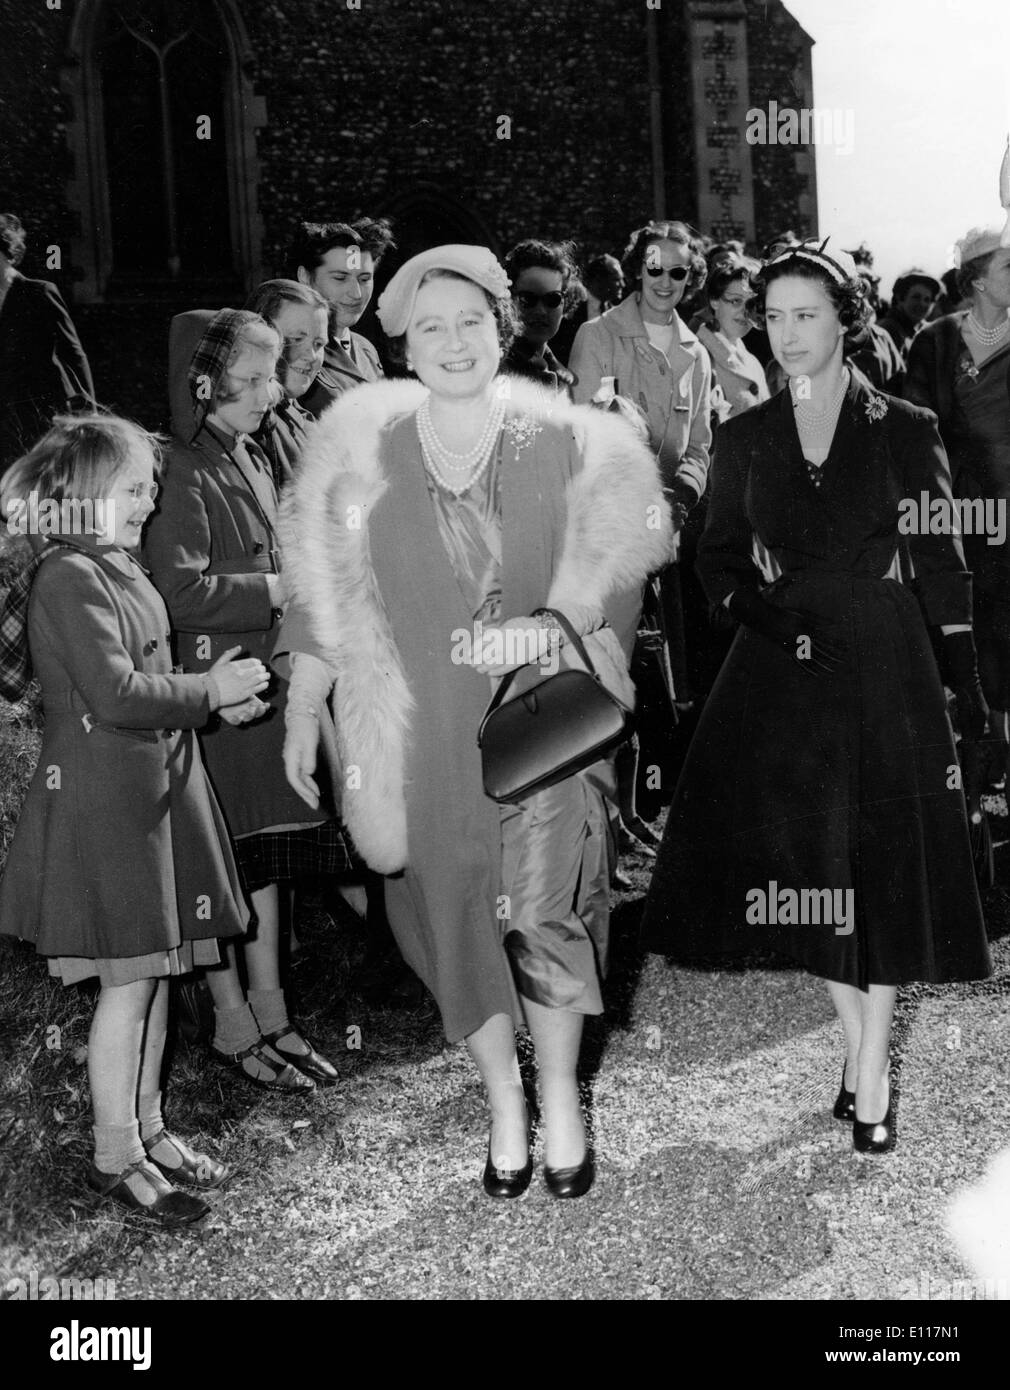 The Queen Mother Elizabeth Bowes-Lyon walks the streets Stock Photo - Alamy